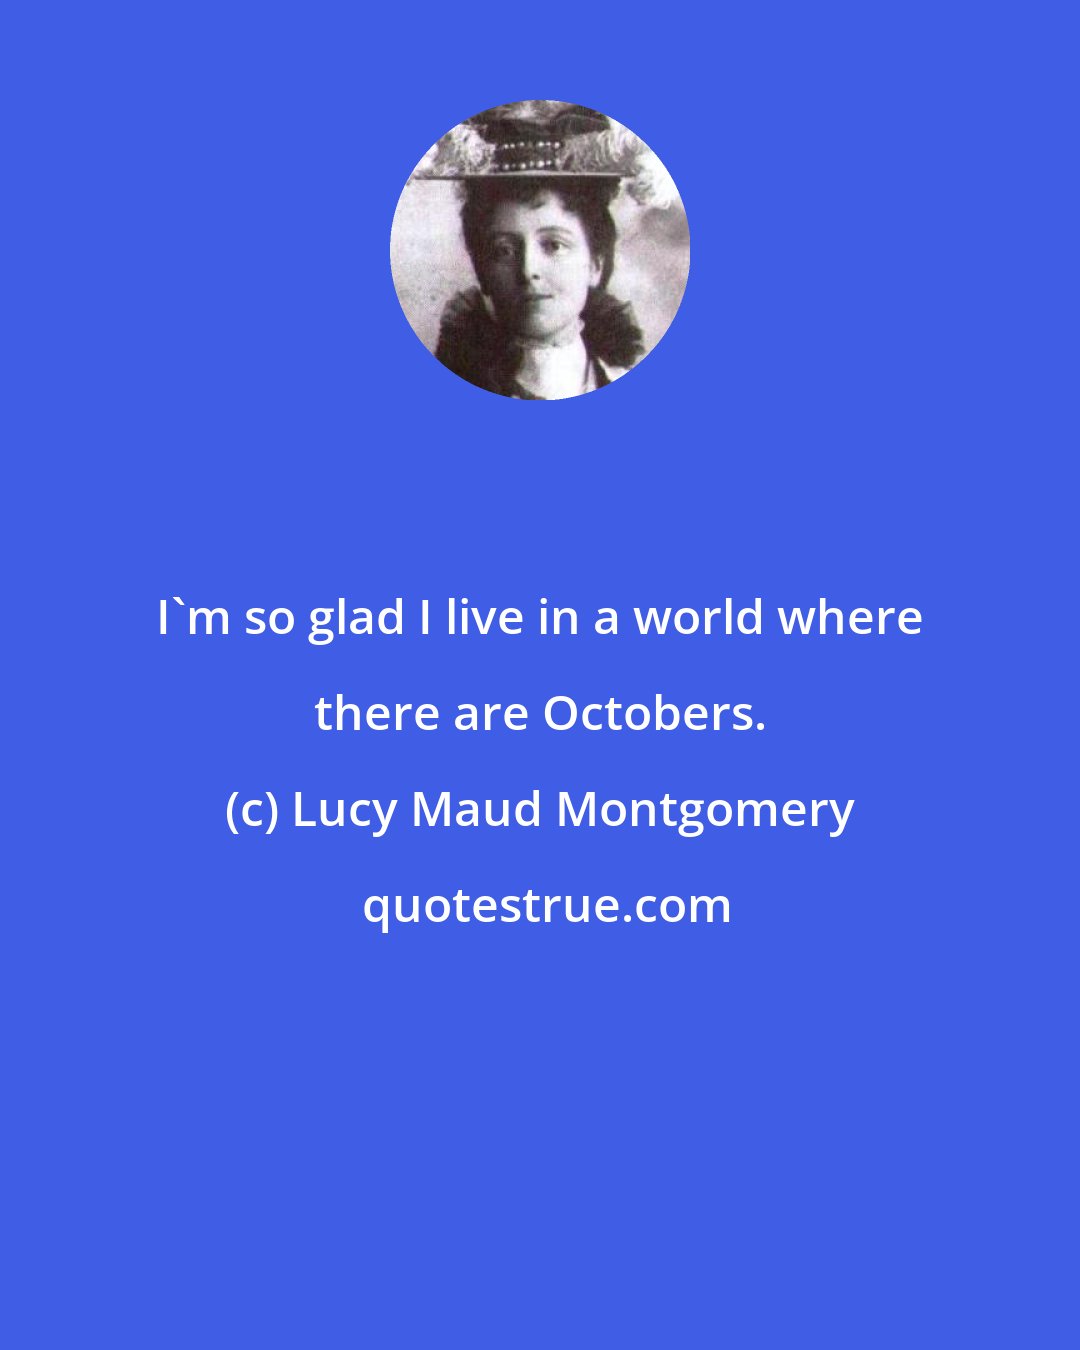 Lucy Maud Montgomery: I'm so glad I live in a world where there are Octobers.